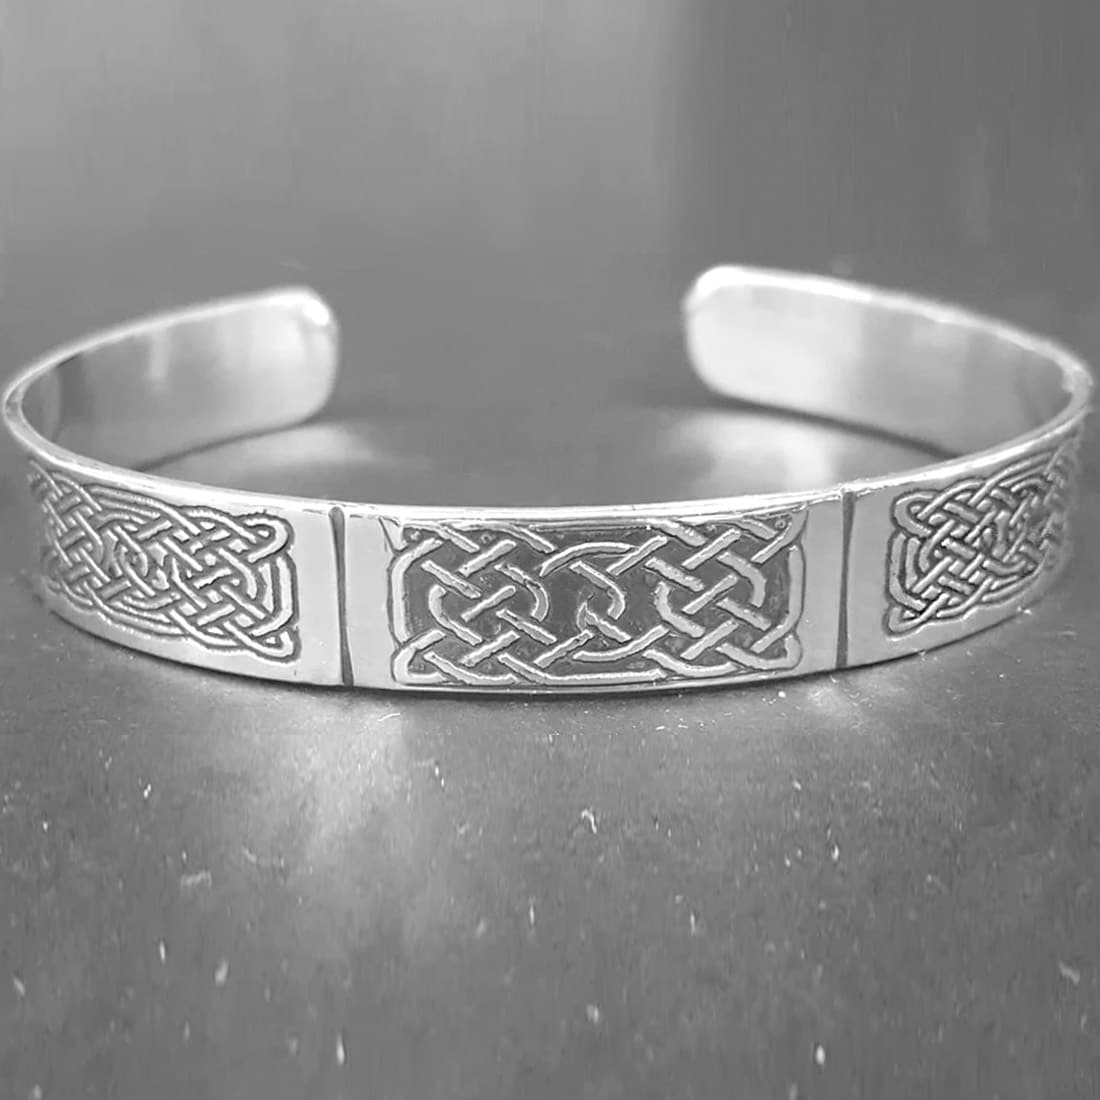 Buy SOLID Sterling Silver Celtic Cuff Bracelet Celtic Bangle Adjustable  Silver Cuff Bracelet Trinity Triquetra Cuff Online in India - Etsy